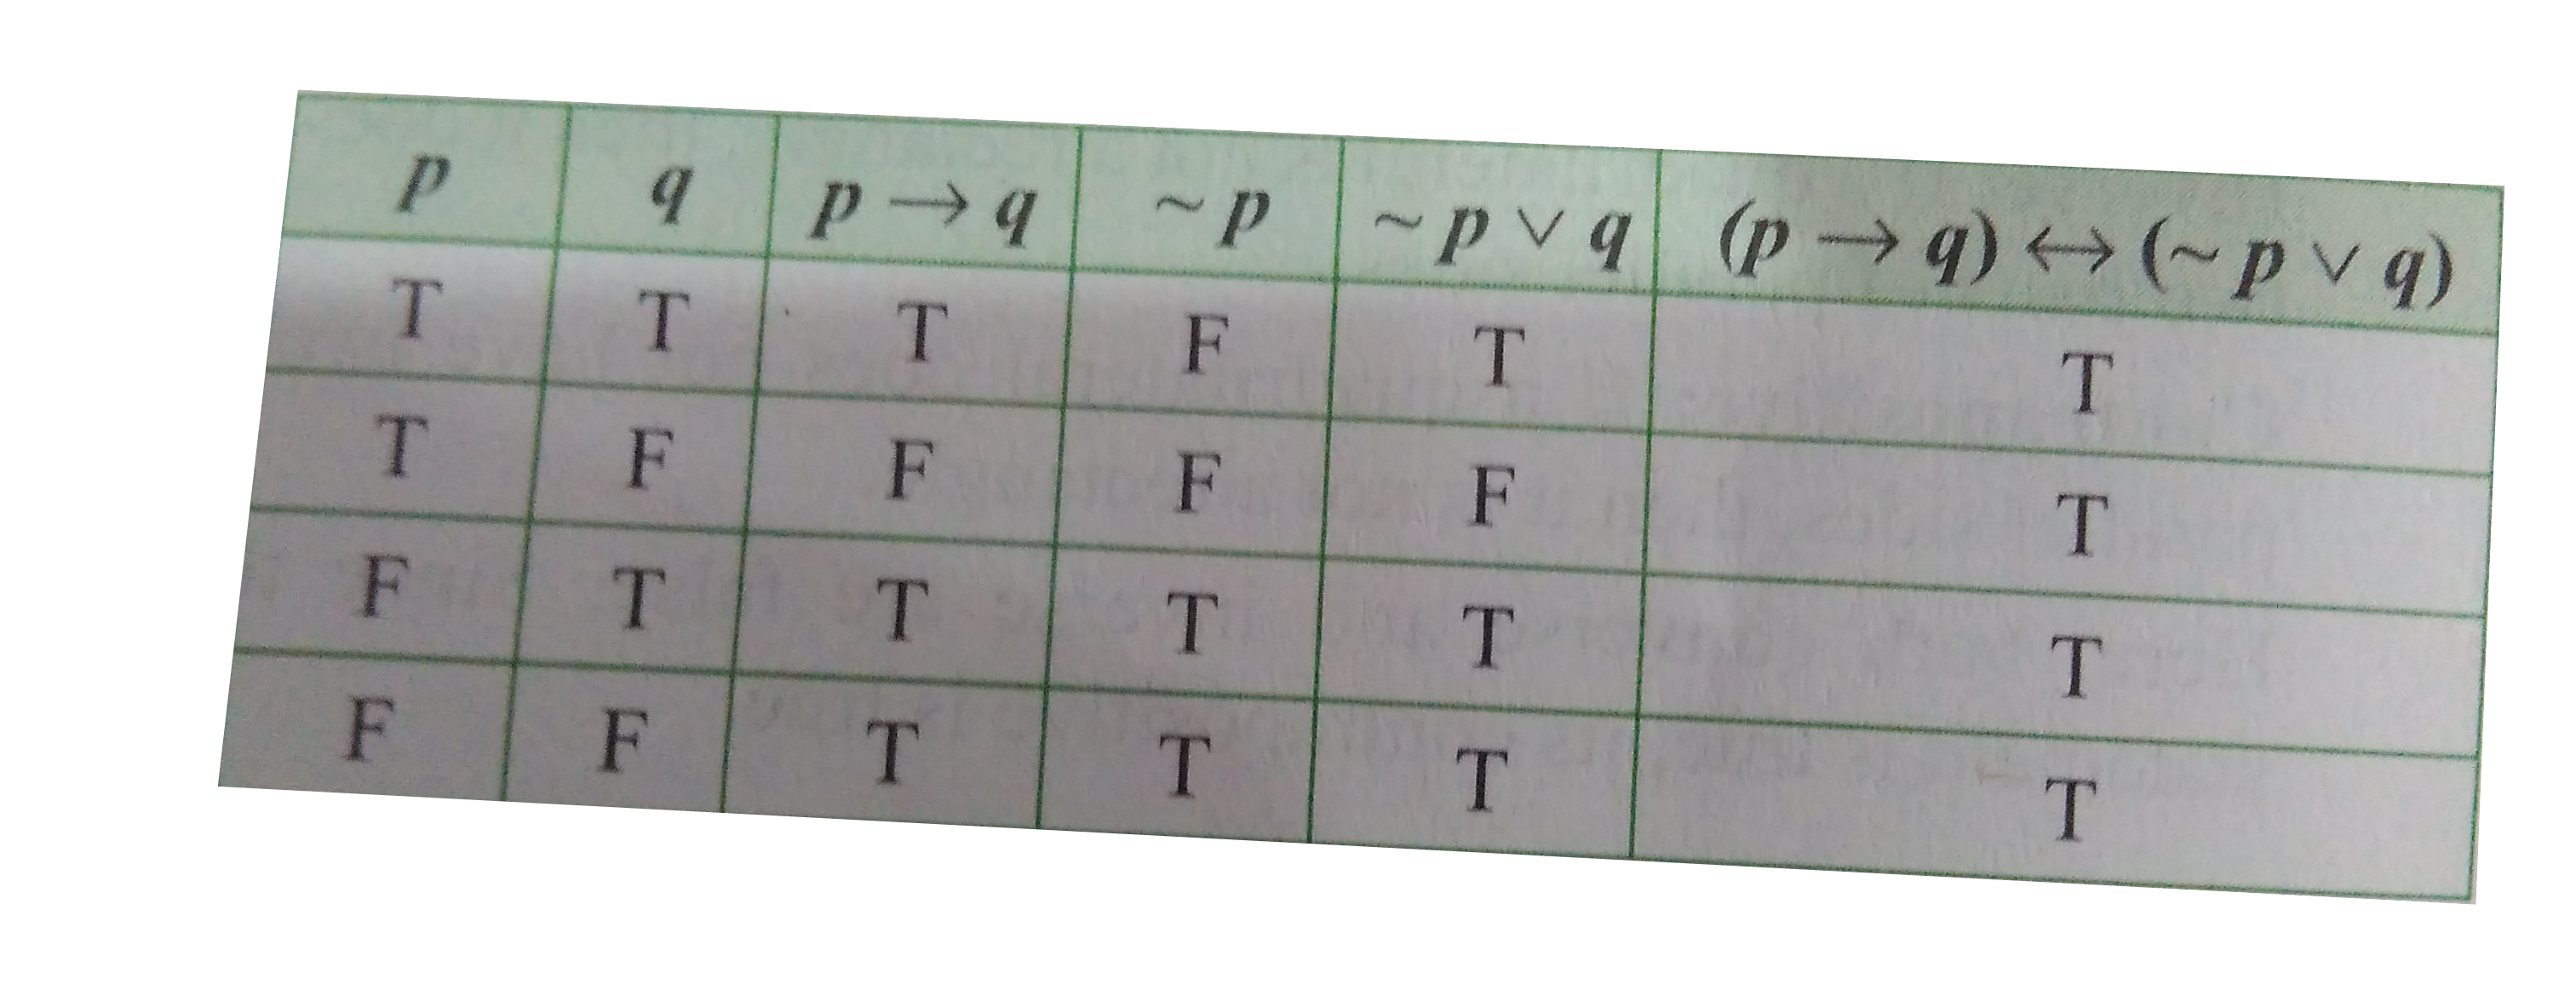 In The Truth Table For The Statements P To Q Harr P Vvq T